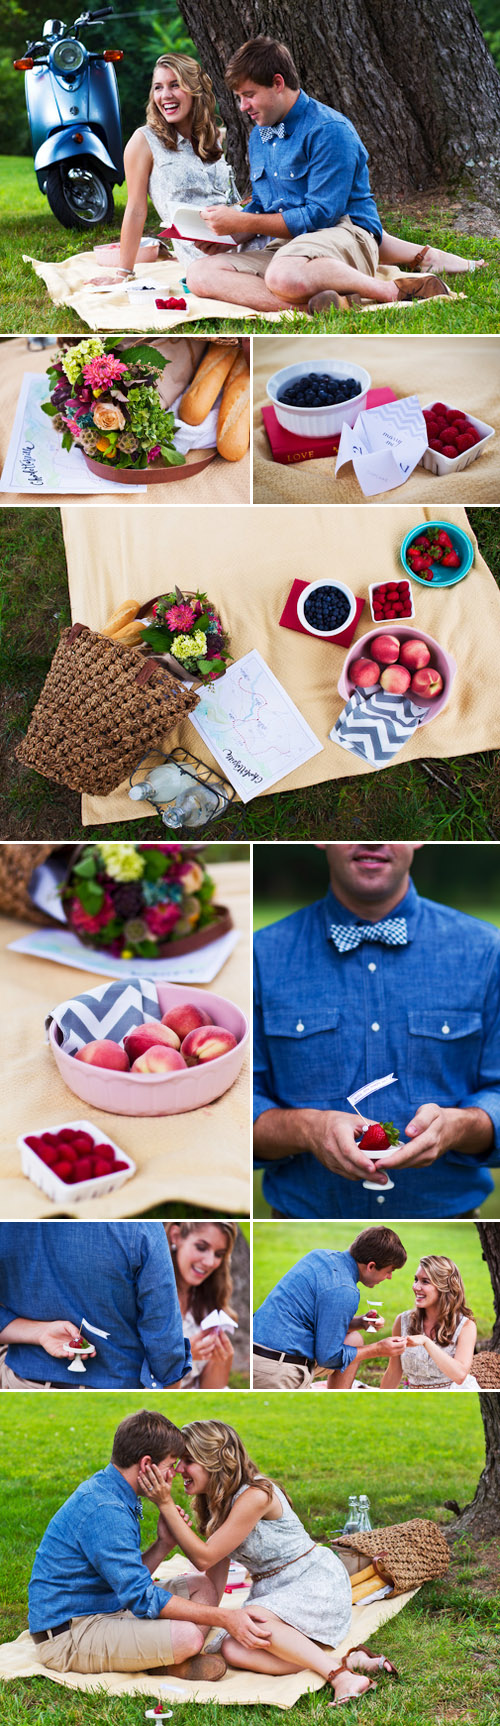 blue and white chevron print wedding decor, picnic engagement inspiration shoot in Charlottesville, Virginia, photos by Holland Photo Arts